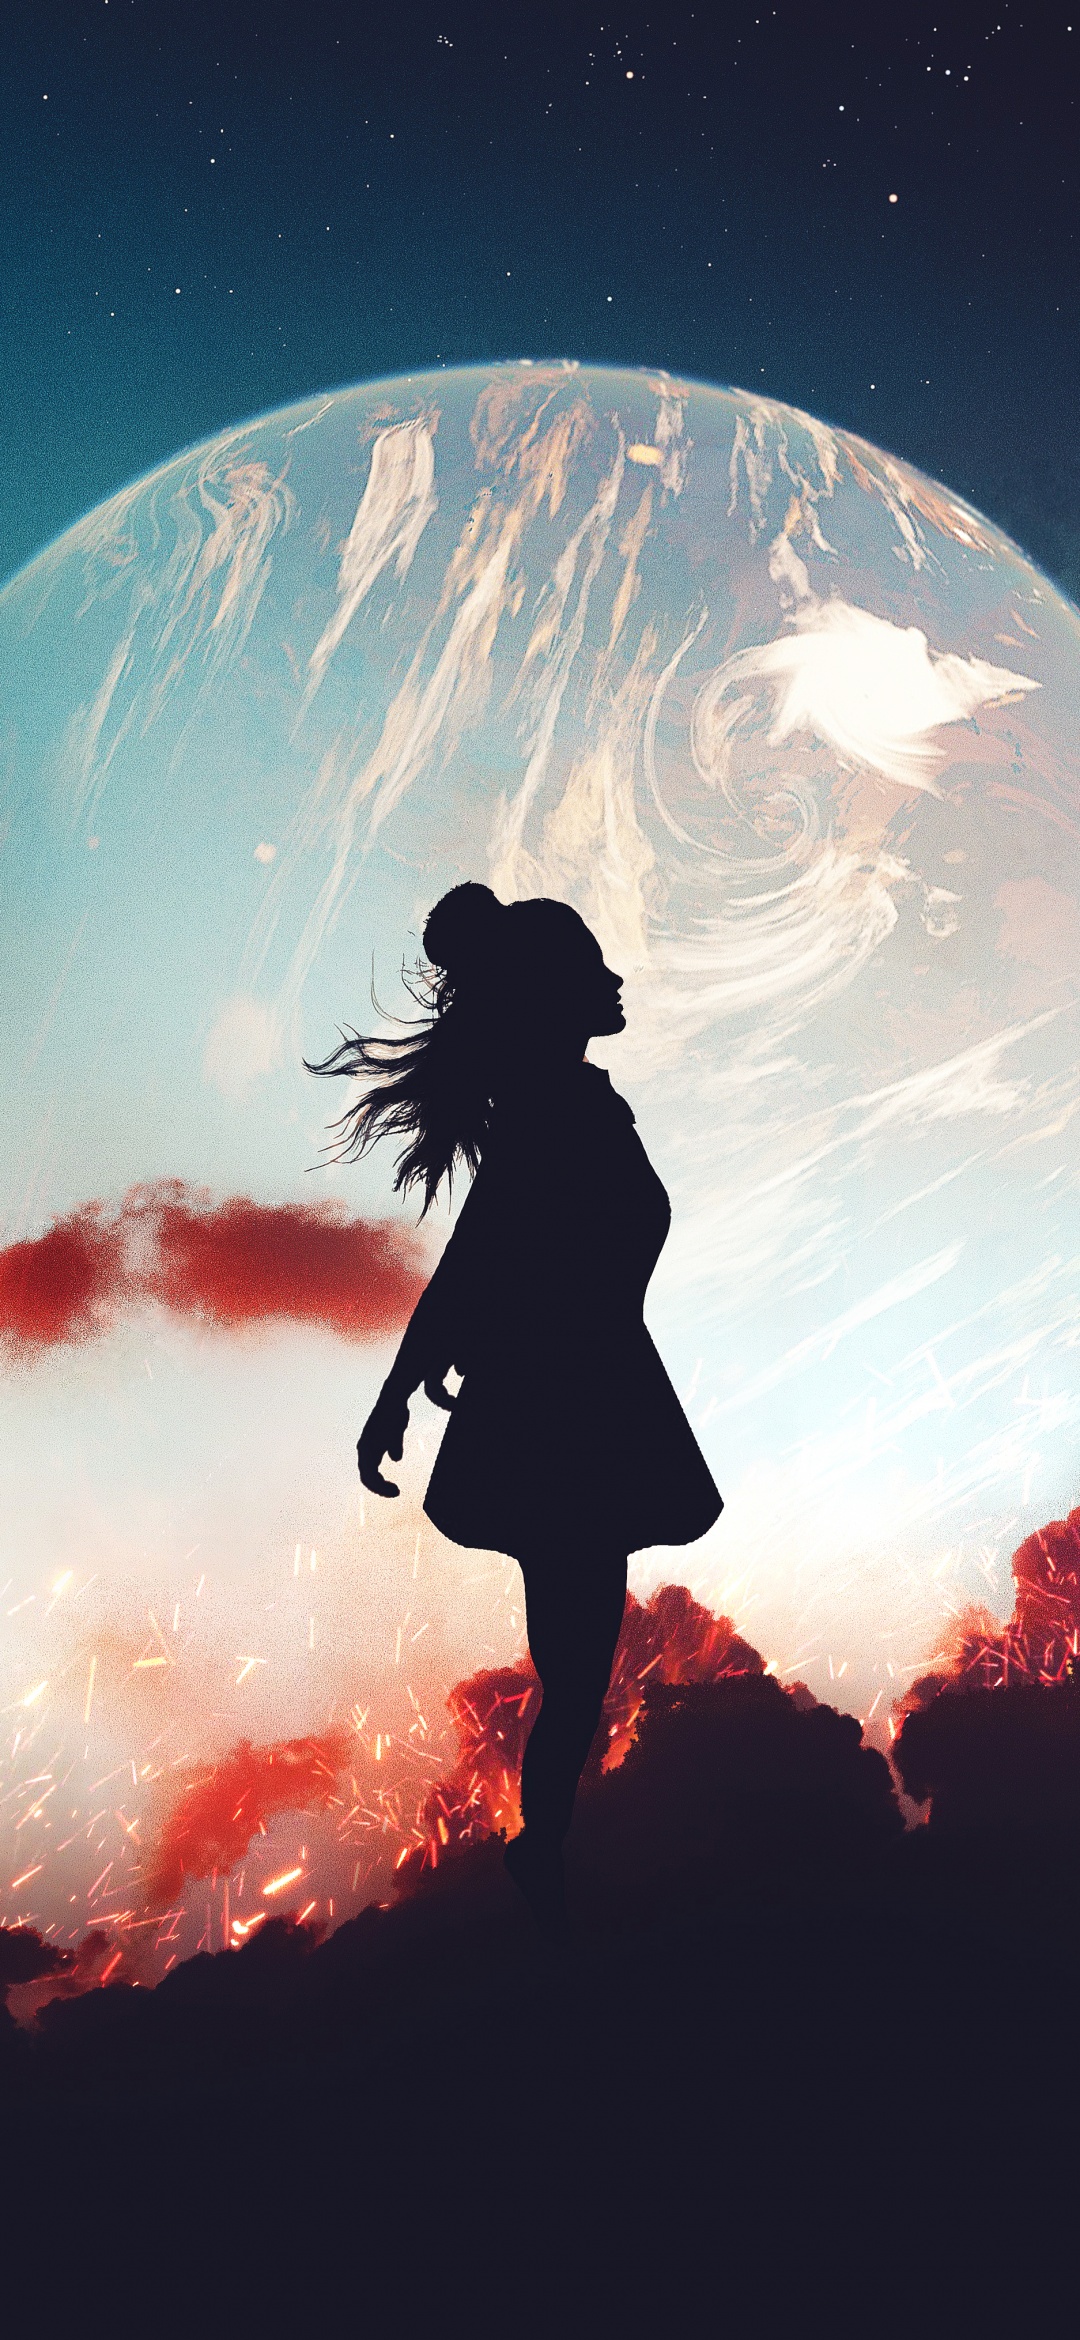 https://4kwallpapers.com/images/wallpapers/alone-girl-silhouette-mood-planet-dream-1080x2340-1139.jpg